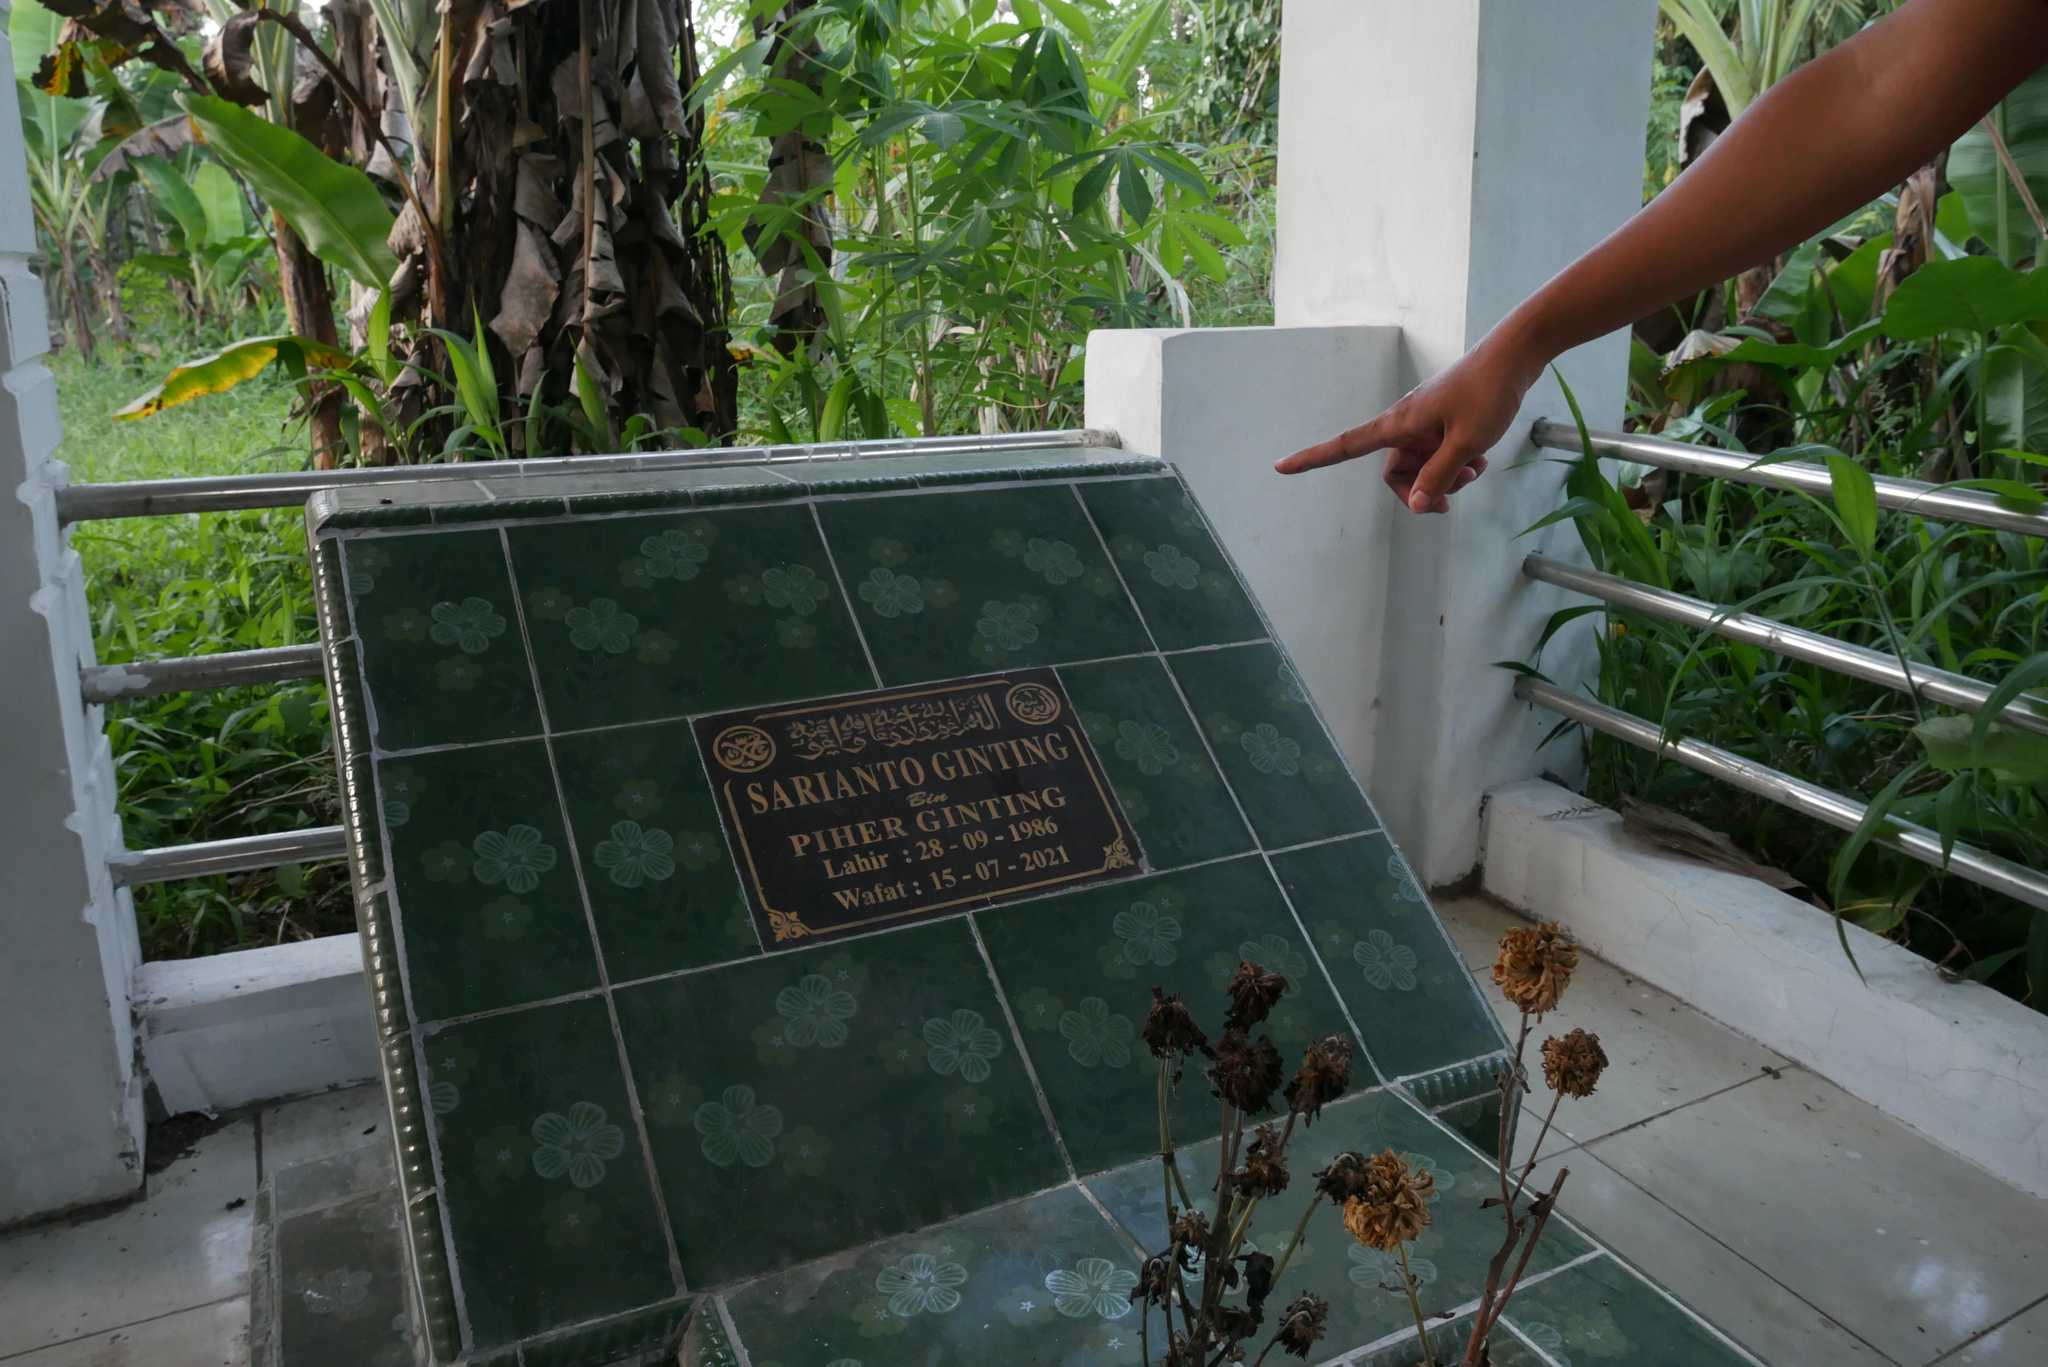 The grave of Sarianto Ginting, who died just three days after being sent to the facility. Photo by Tonggo Simangunsong.